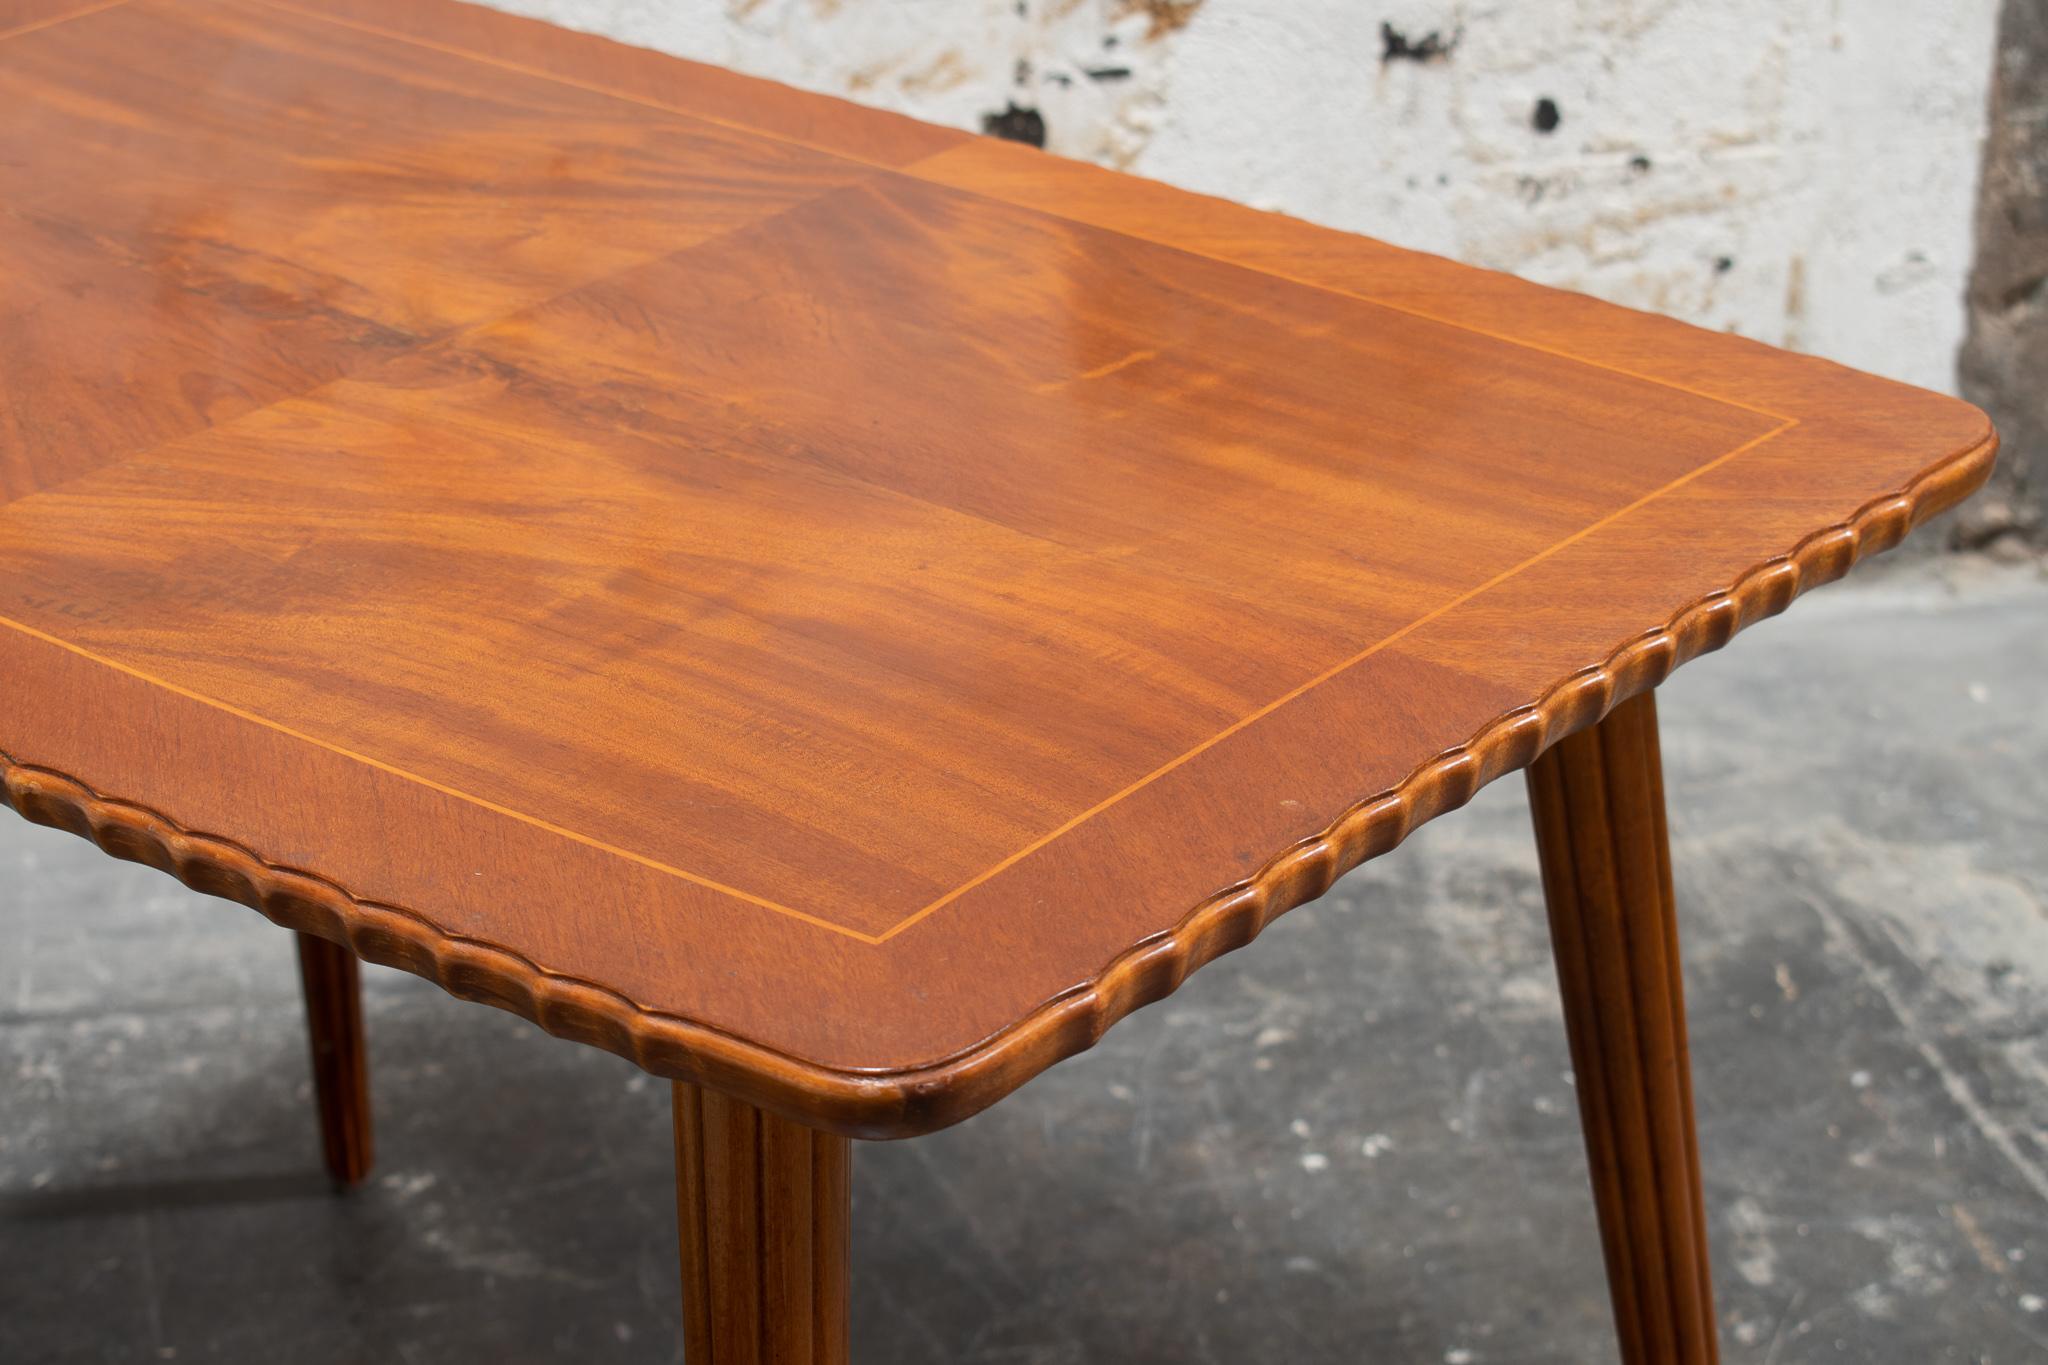 Mid-20th Century Coffee Table with Fluted Edge in Crotch Mahogany, 1940's Sweden For Sale